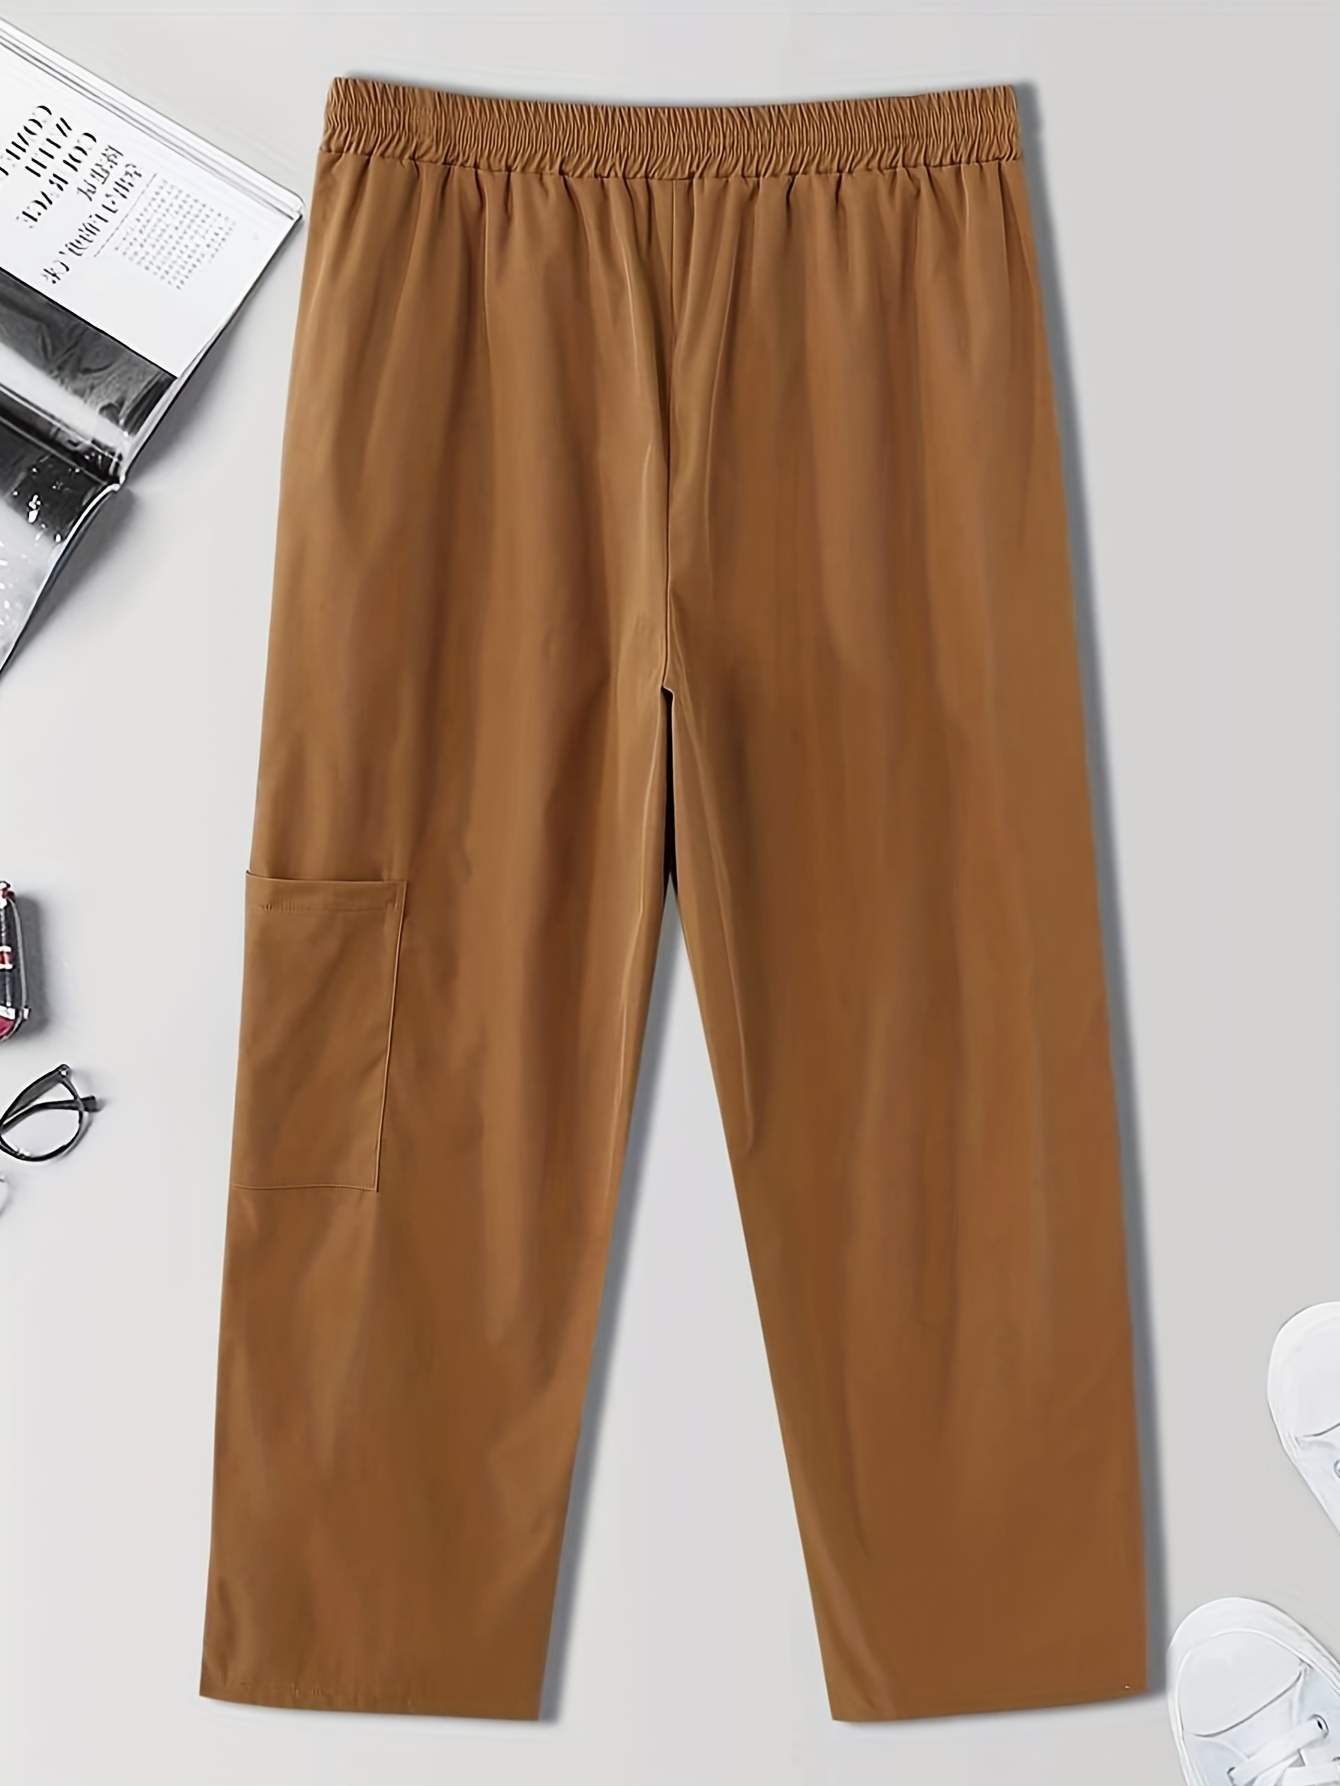 Brown Men'S Pants Men Spring And Summer Pant Casual All Match Solid Color  Painting Cotton Linen Loose Plus Size Trouser Fashion Beach Pockets Pant 